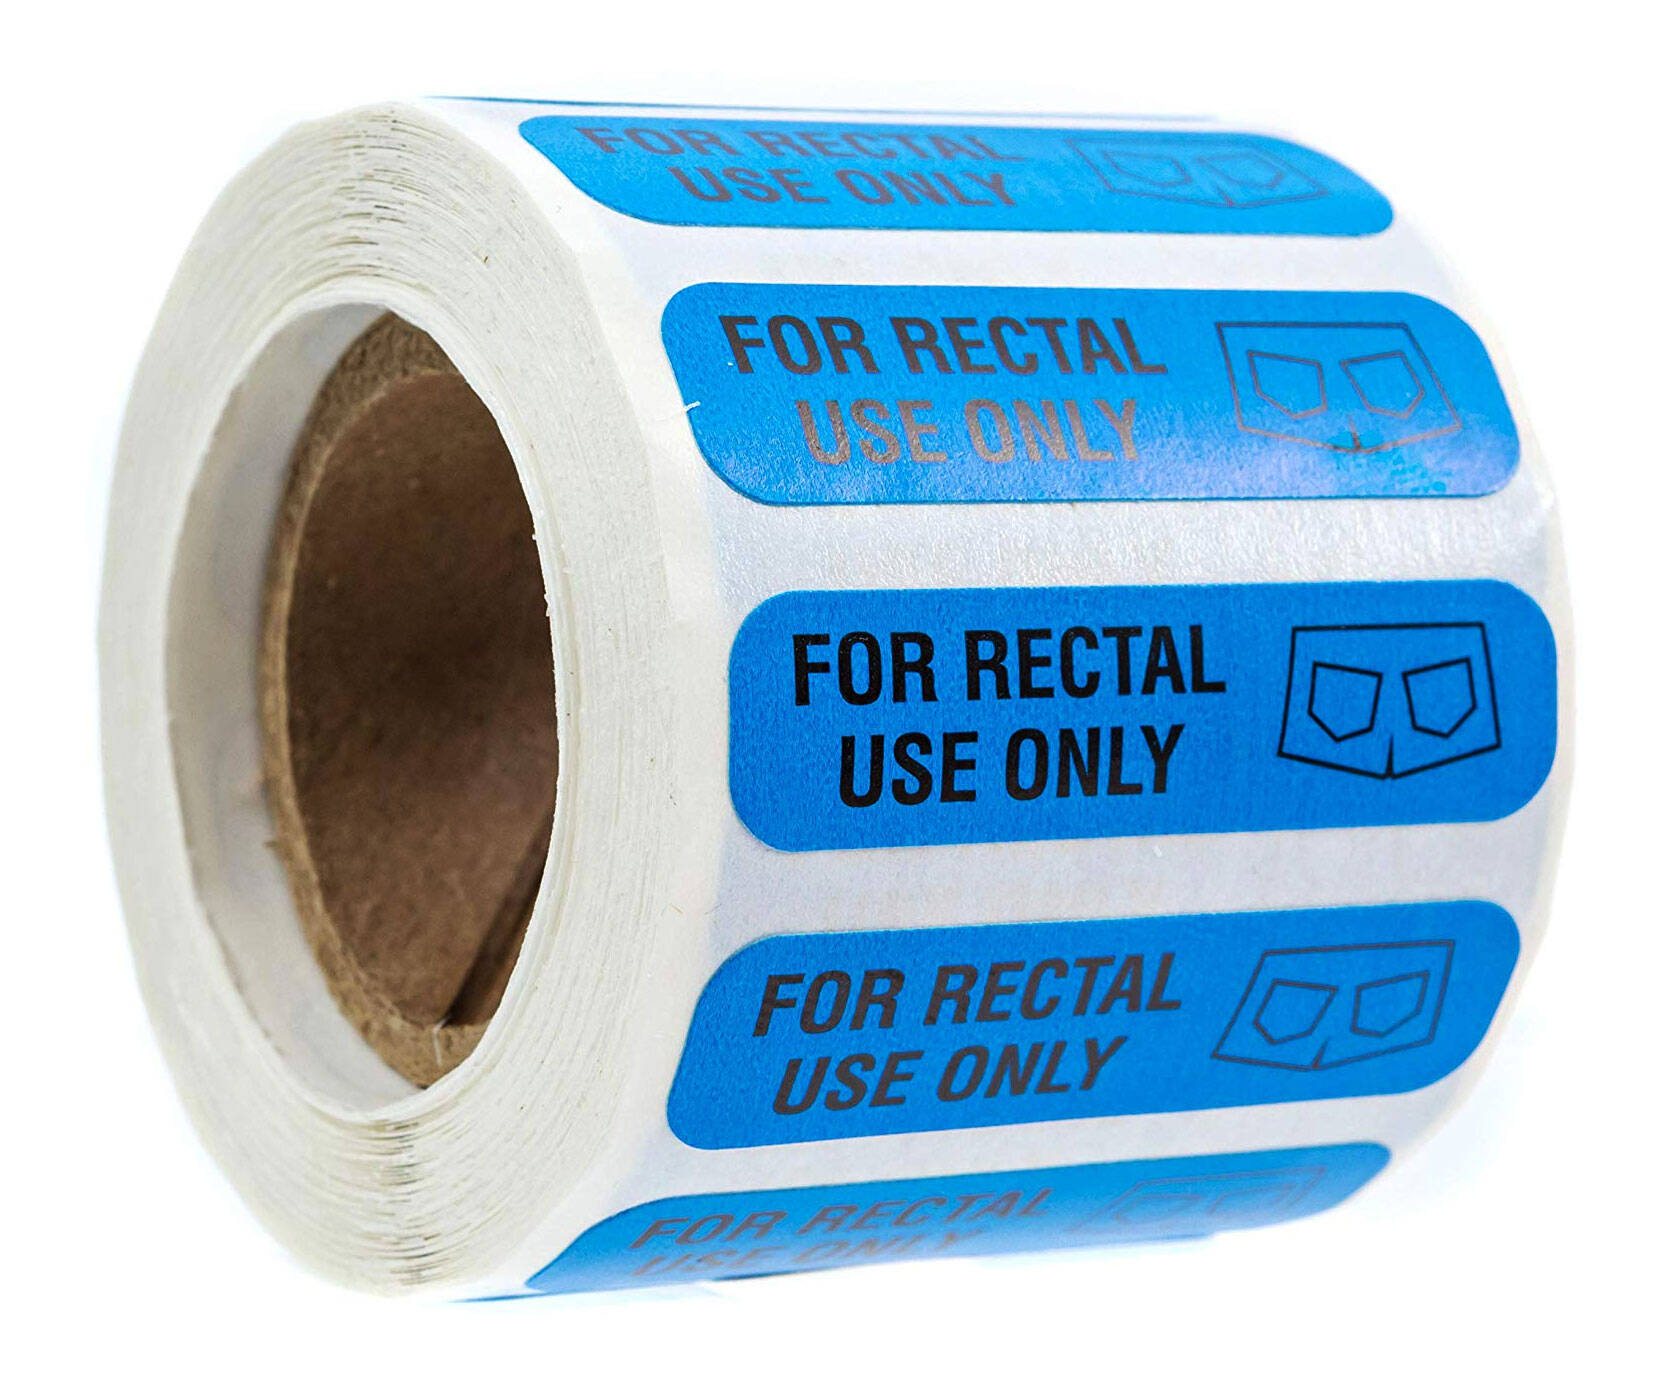 For Rectal Use Only Stickers - //coolthings.us